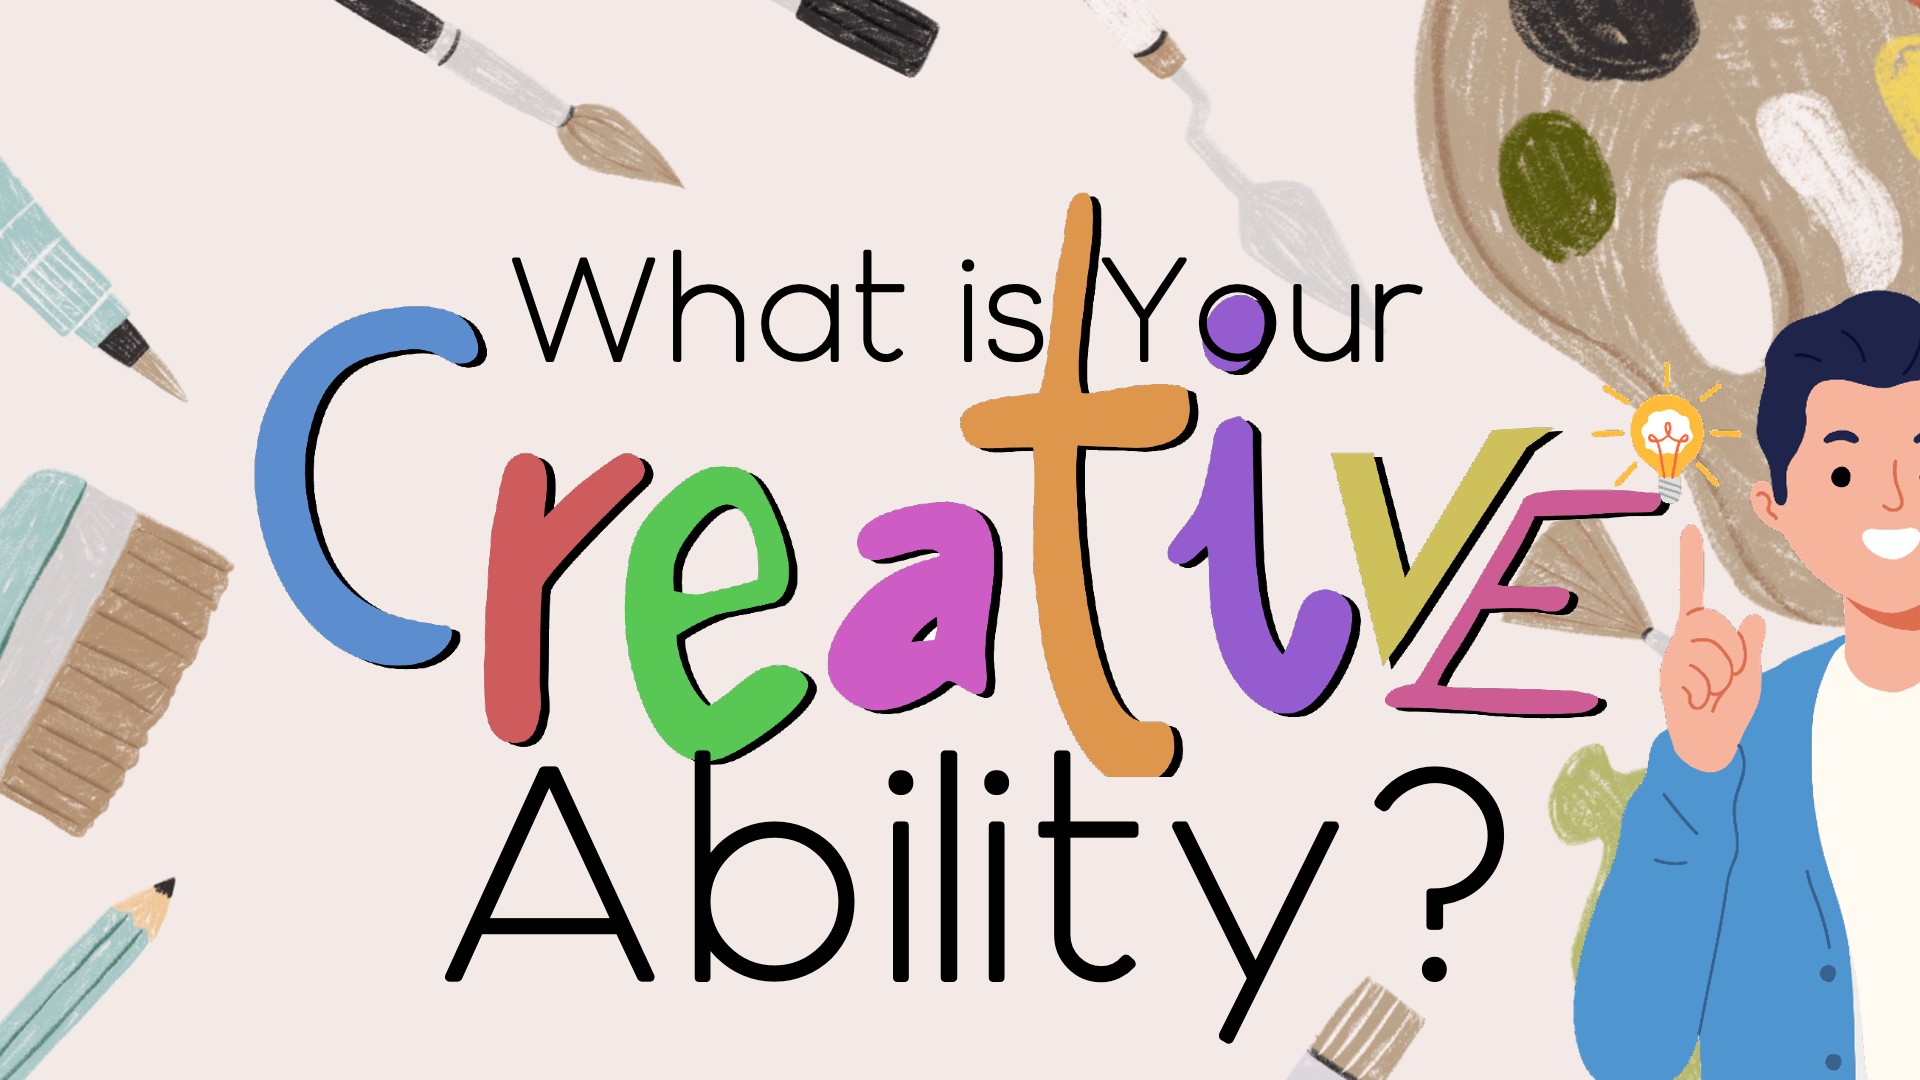 What is Your Creative Ability?